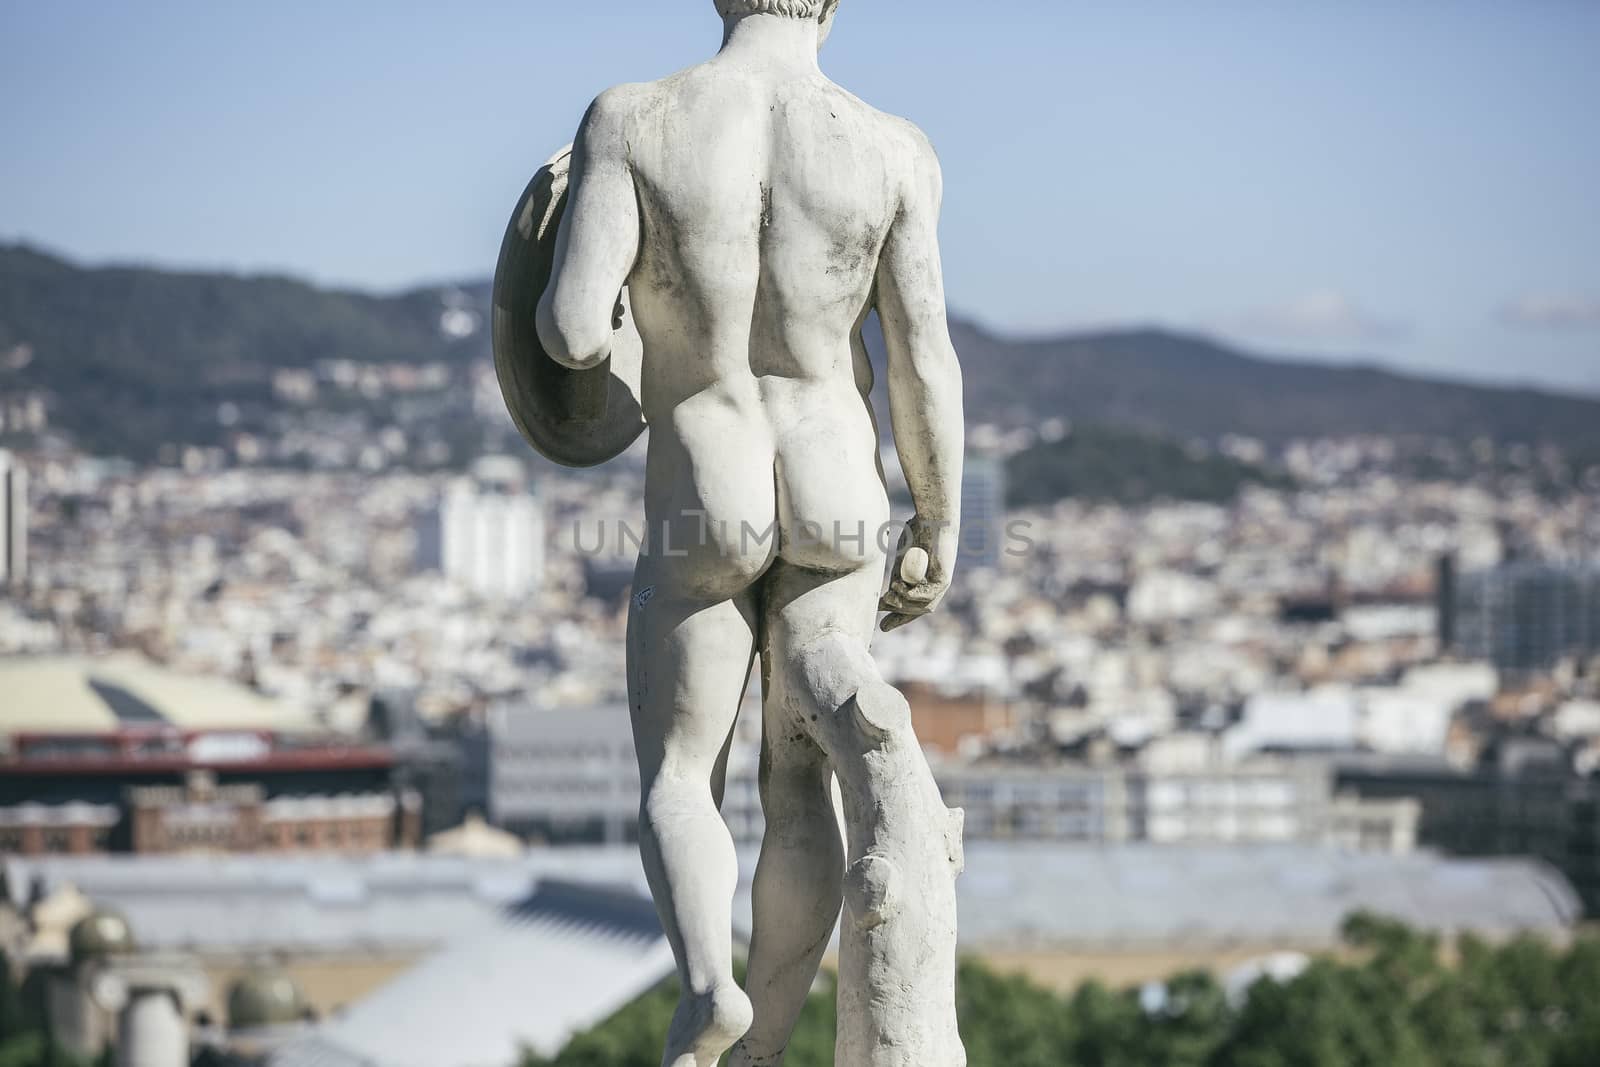 Statue sited in Montjuic , Barcelona by nachrc2001